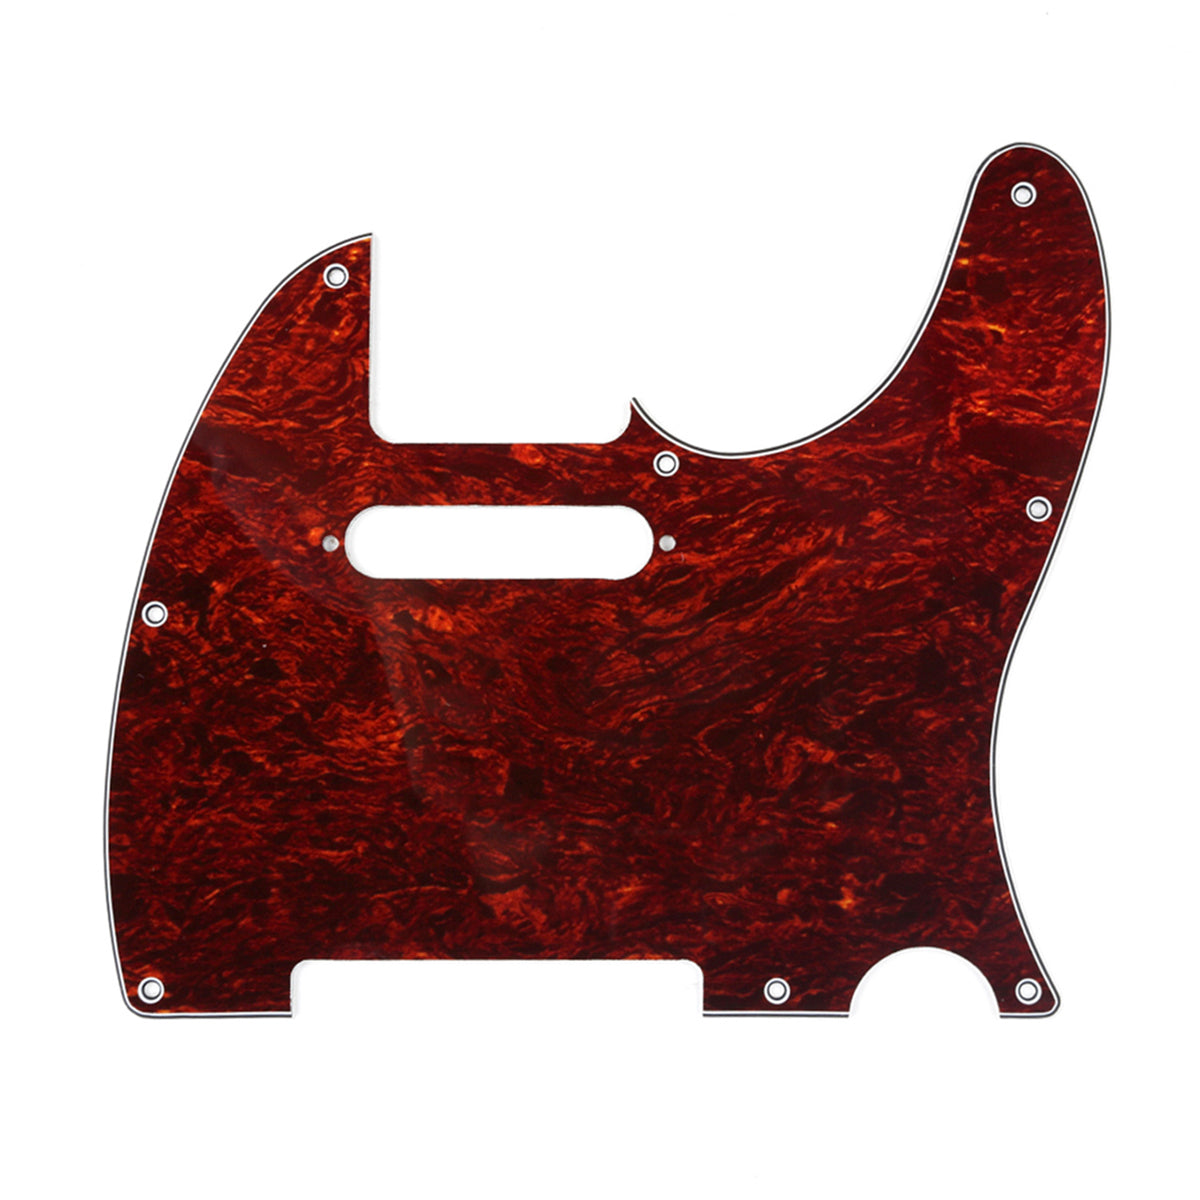 Musiclily 8 Hole Tele Guitar Pickguard for USA/Mexican Made Fender Standard Telecaster Modern Style, 4Ply Red Tortoise